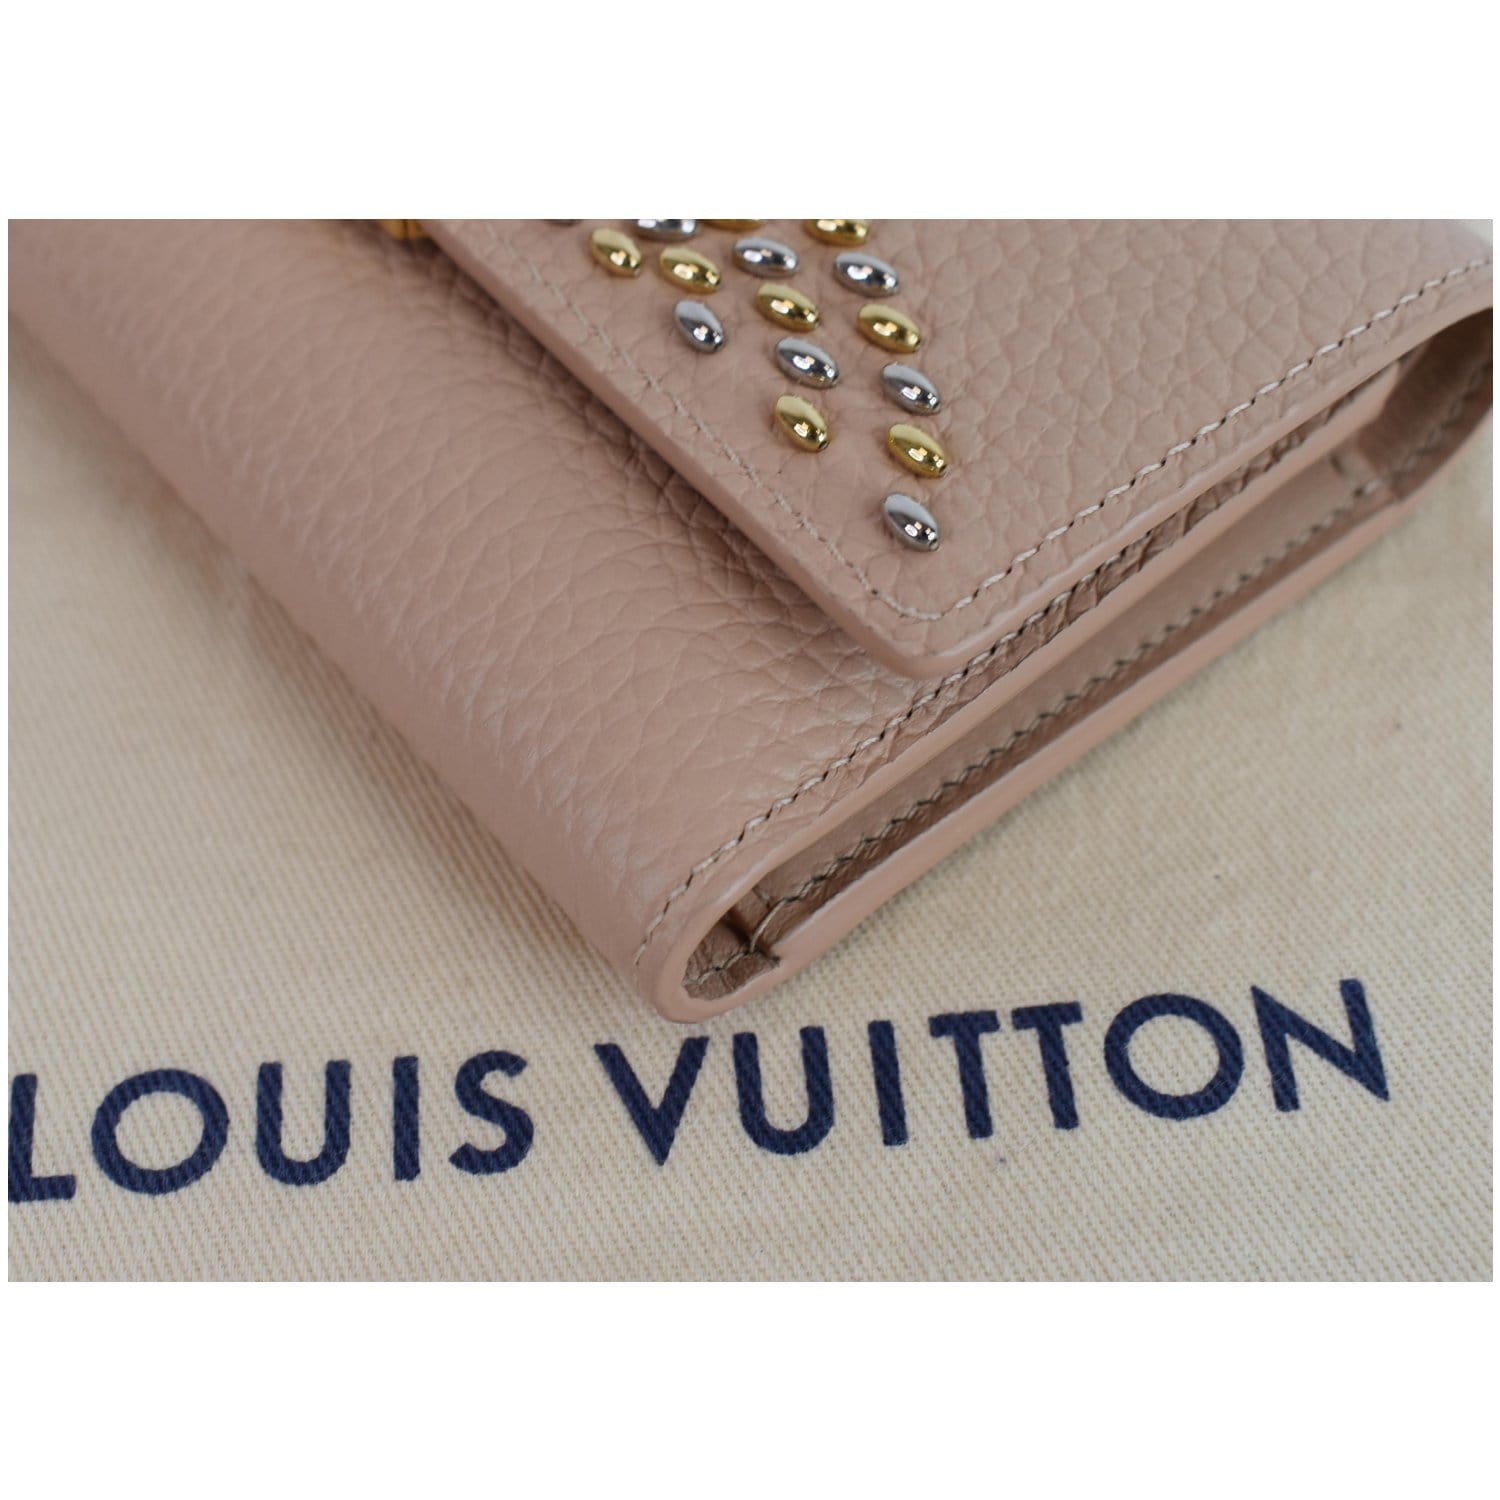 Louis Vuitton Capucines Compact Wallet Embellished Leather Neutral 2233391